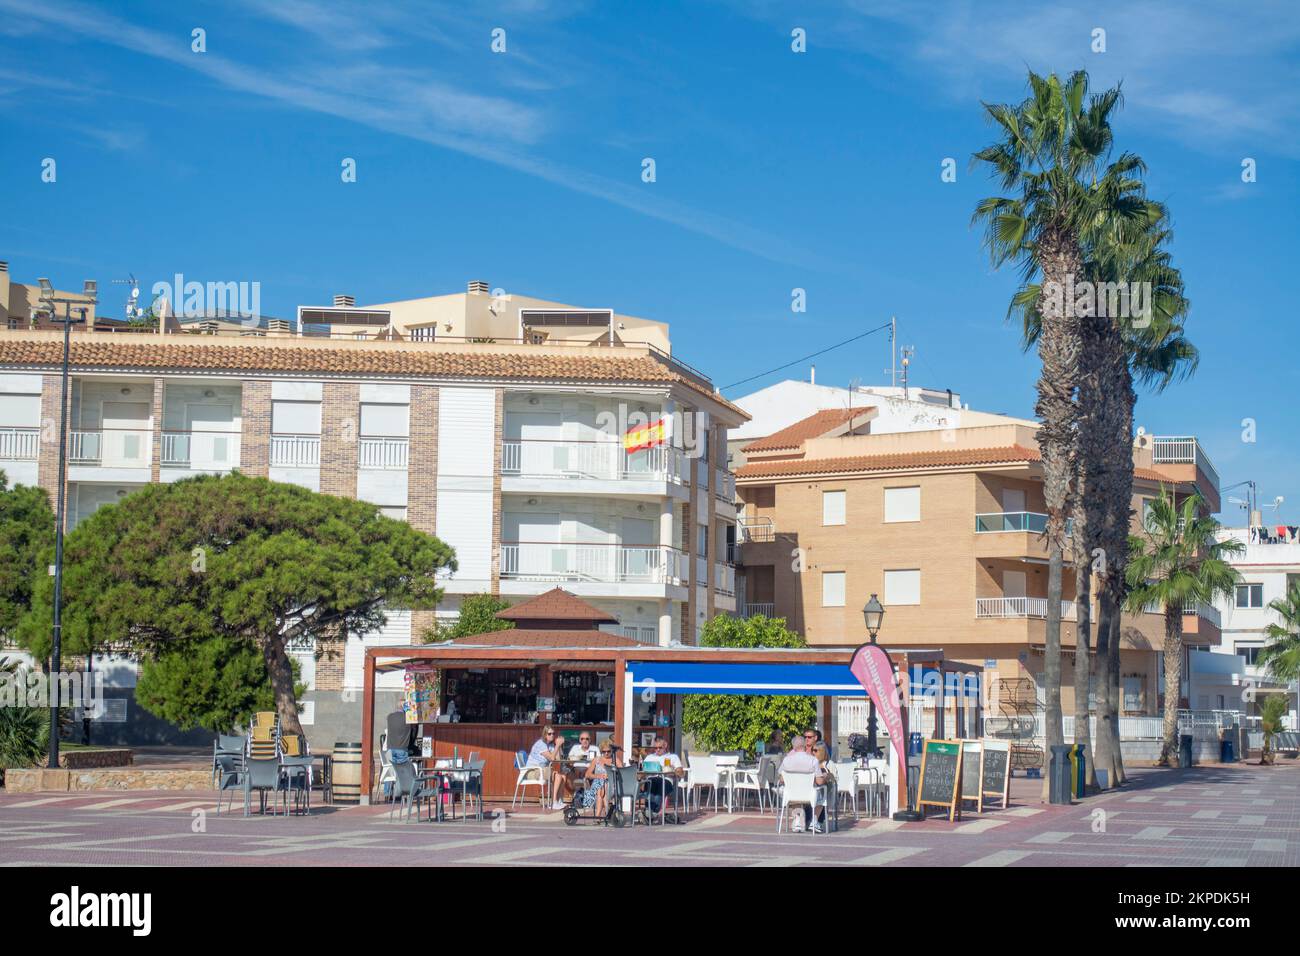 Pavement Cafe on the promenade at Los Alcazares on the Costa Calida in Spain. Stock Photo